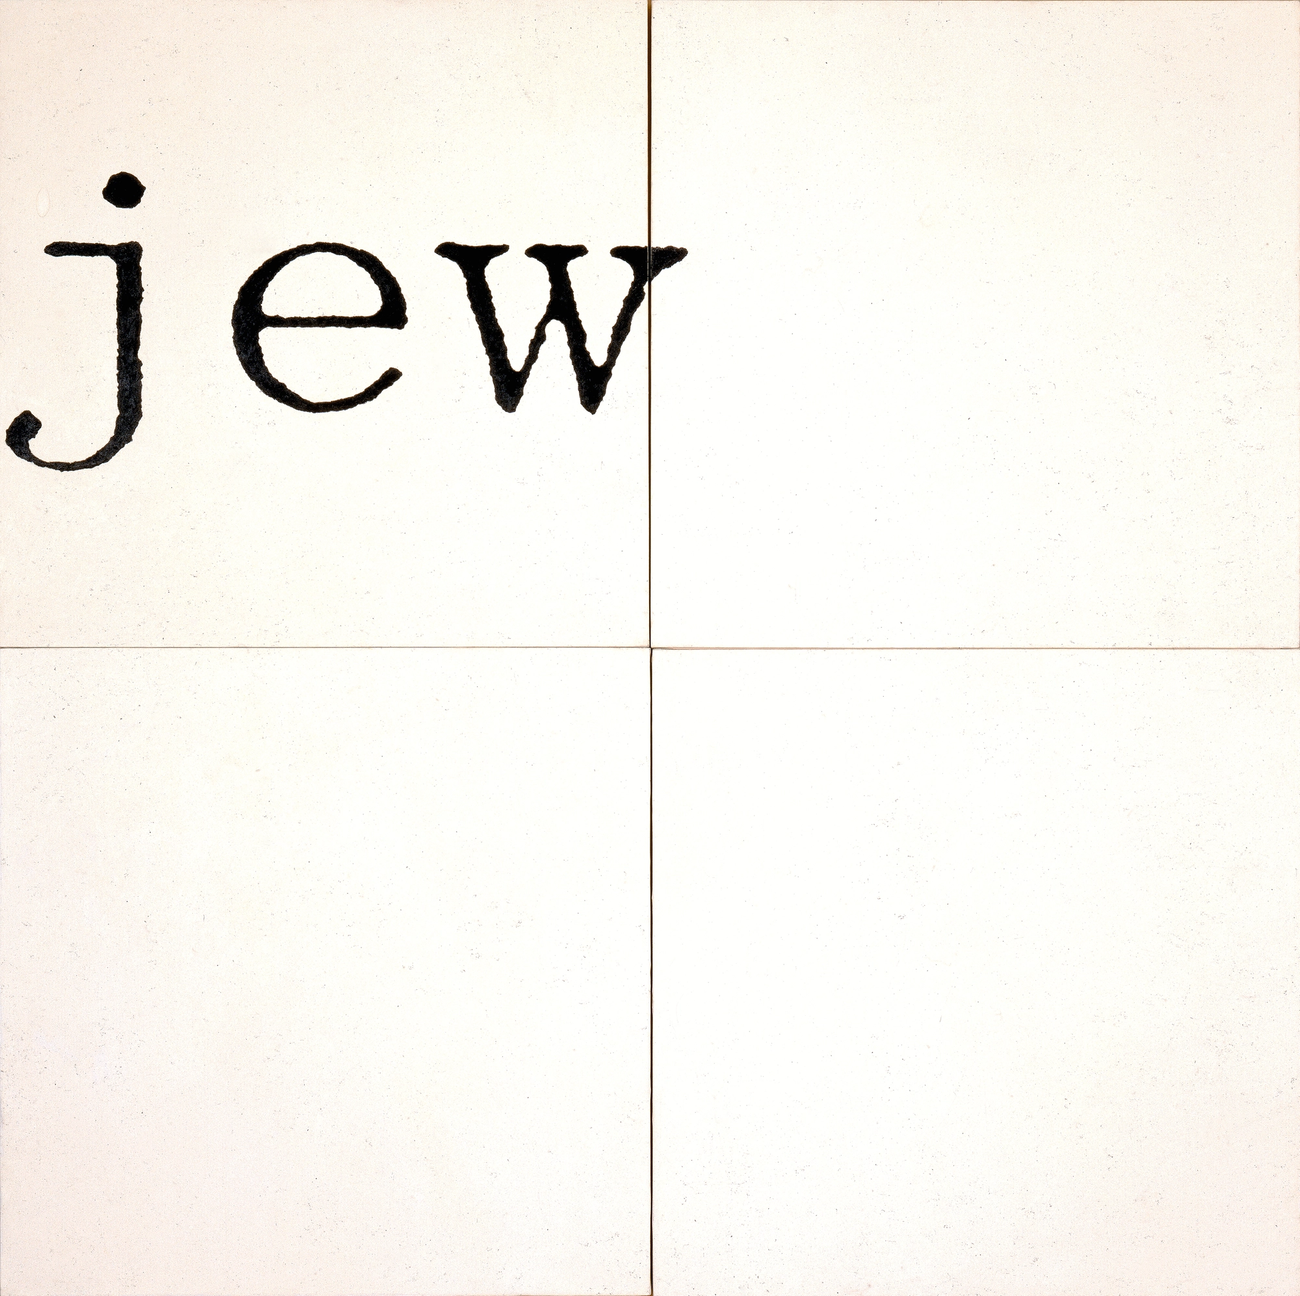 Jewish Museum, New York, Gift of the artist, 1987-115a-d.